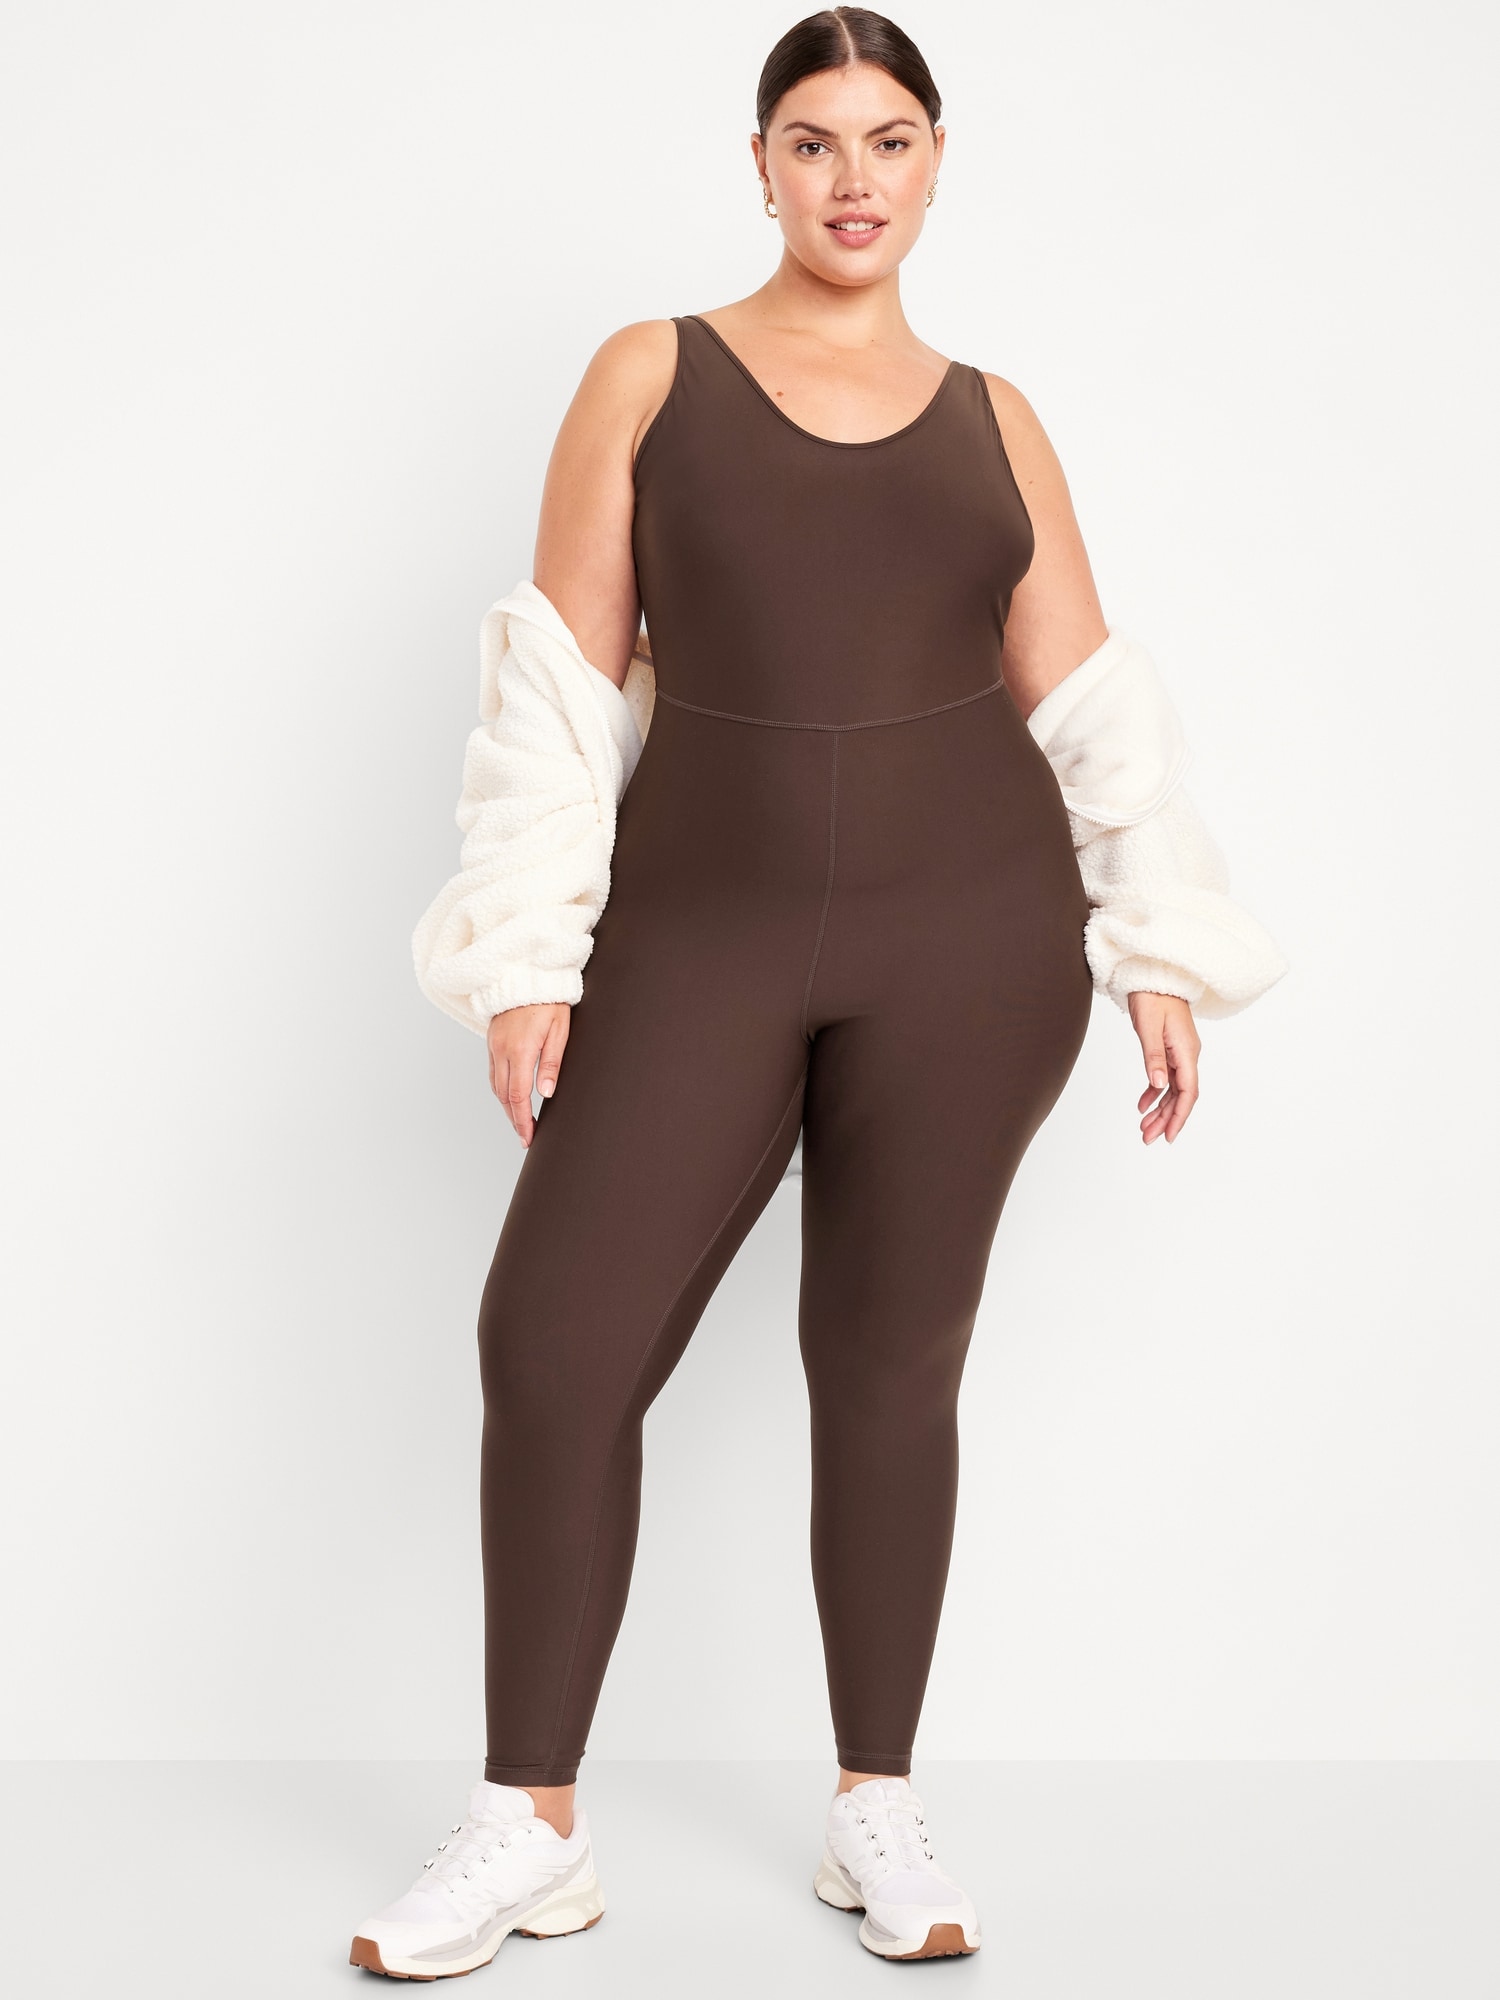 Workout Tops for Women Matching Workout Sets for Women Black one Piece  Bodysuit one Piece Outfits for Women Maternity Leggings Over The Belly  Joggers Pants for Men Plus Size Jumpsuits for Women